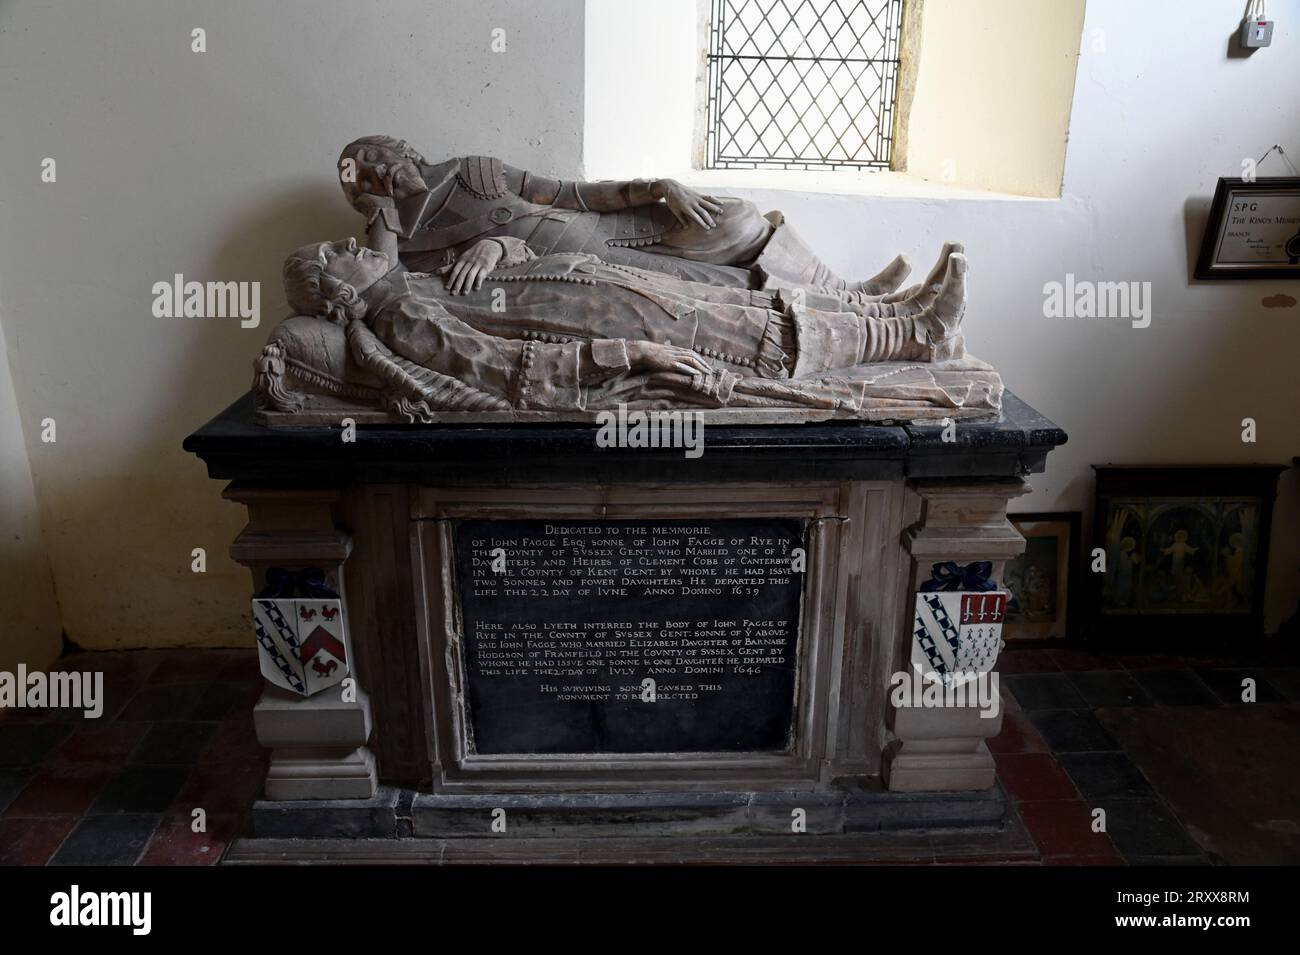 The tomb chest of John Fagge and his son, also named John, dominate the Lady Chapel of St Eanswith Church, Brenzett, Romney Marsh. It dates from 1639. Stock Photo